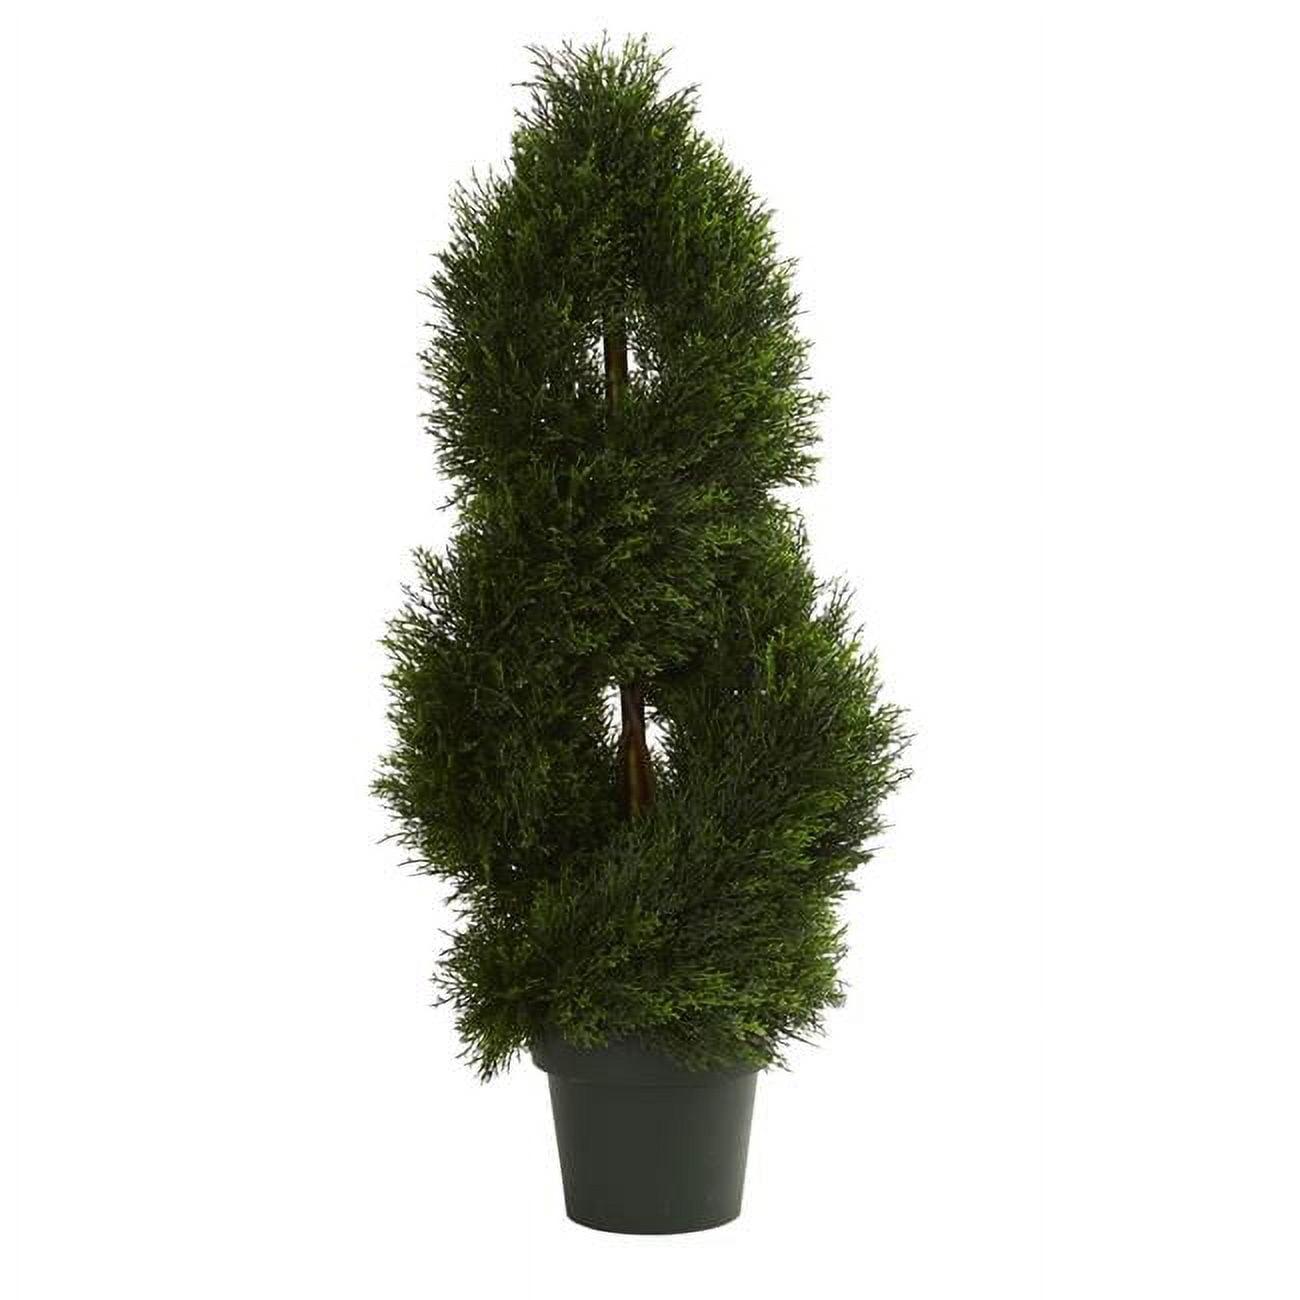 3ft Green Spiral Buxus Artificial Topiary Tree